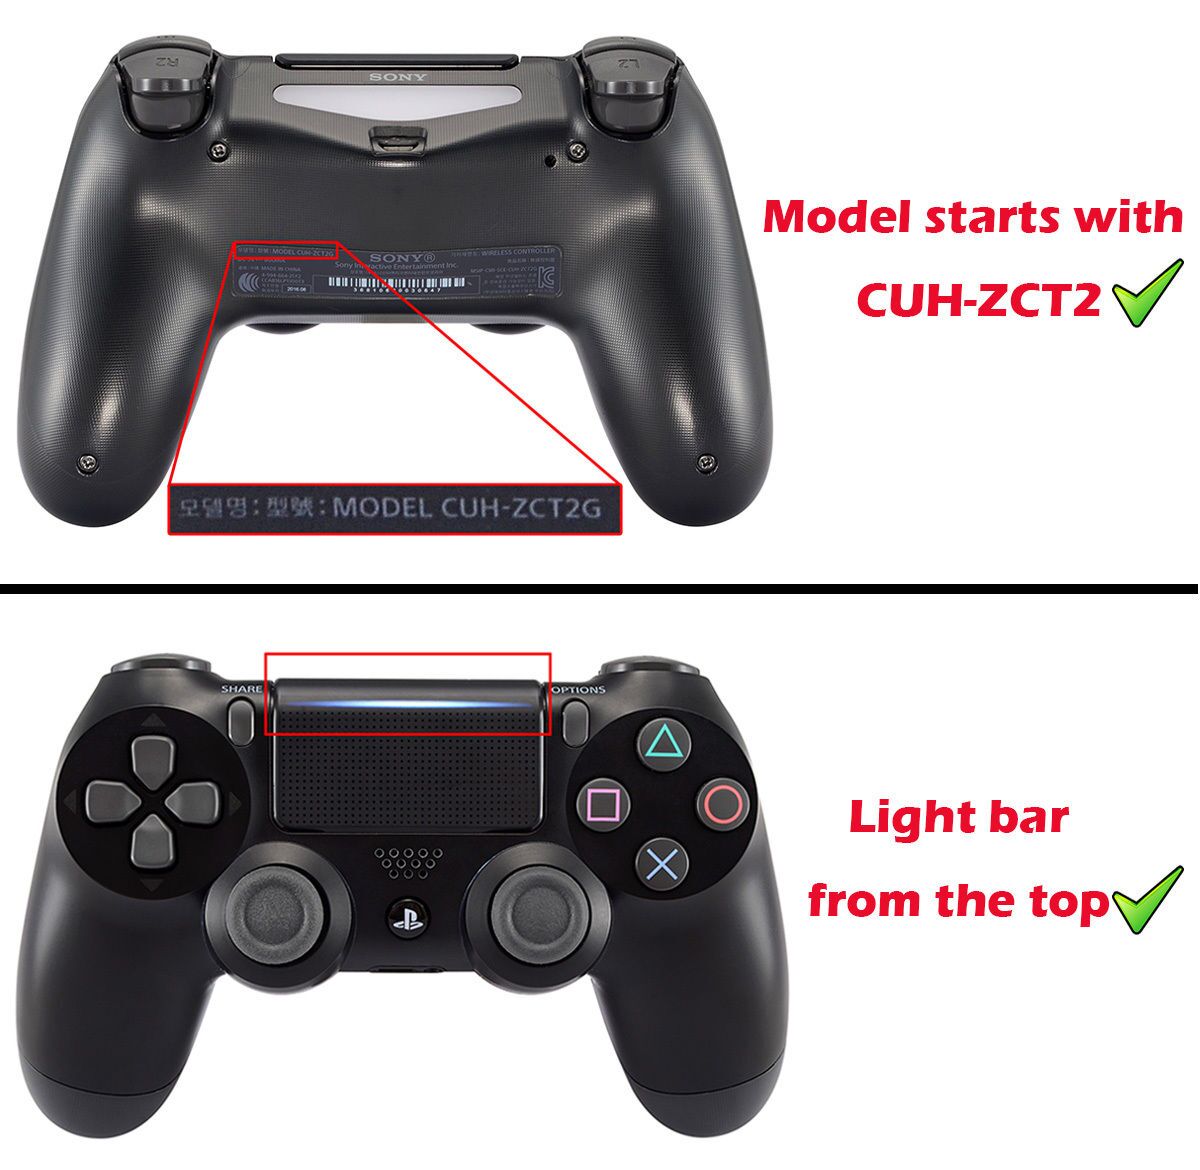 eXtremeRate Multi-Colors (DTF for PS4 CUH-ZCT2 Pro Included Thumbstick D-pad Trigger for Controller, - Home 2.0) Luminated Face DTFS Kit – LED eXtremeRate NOT PS4 Controller Slim Retail Buttons Controller